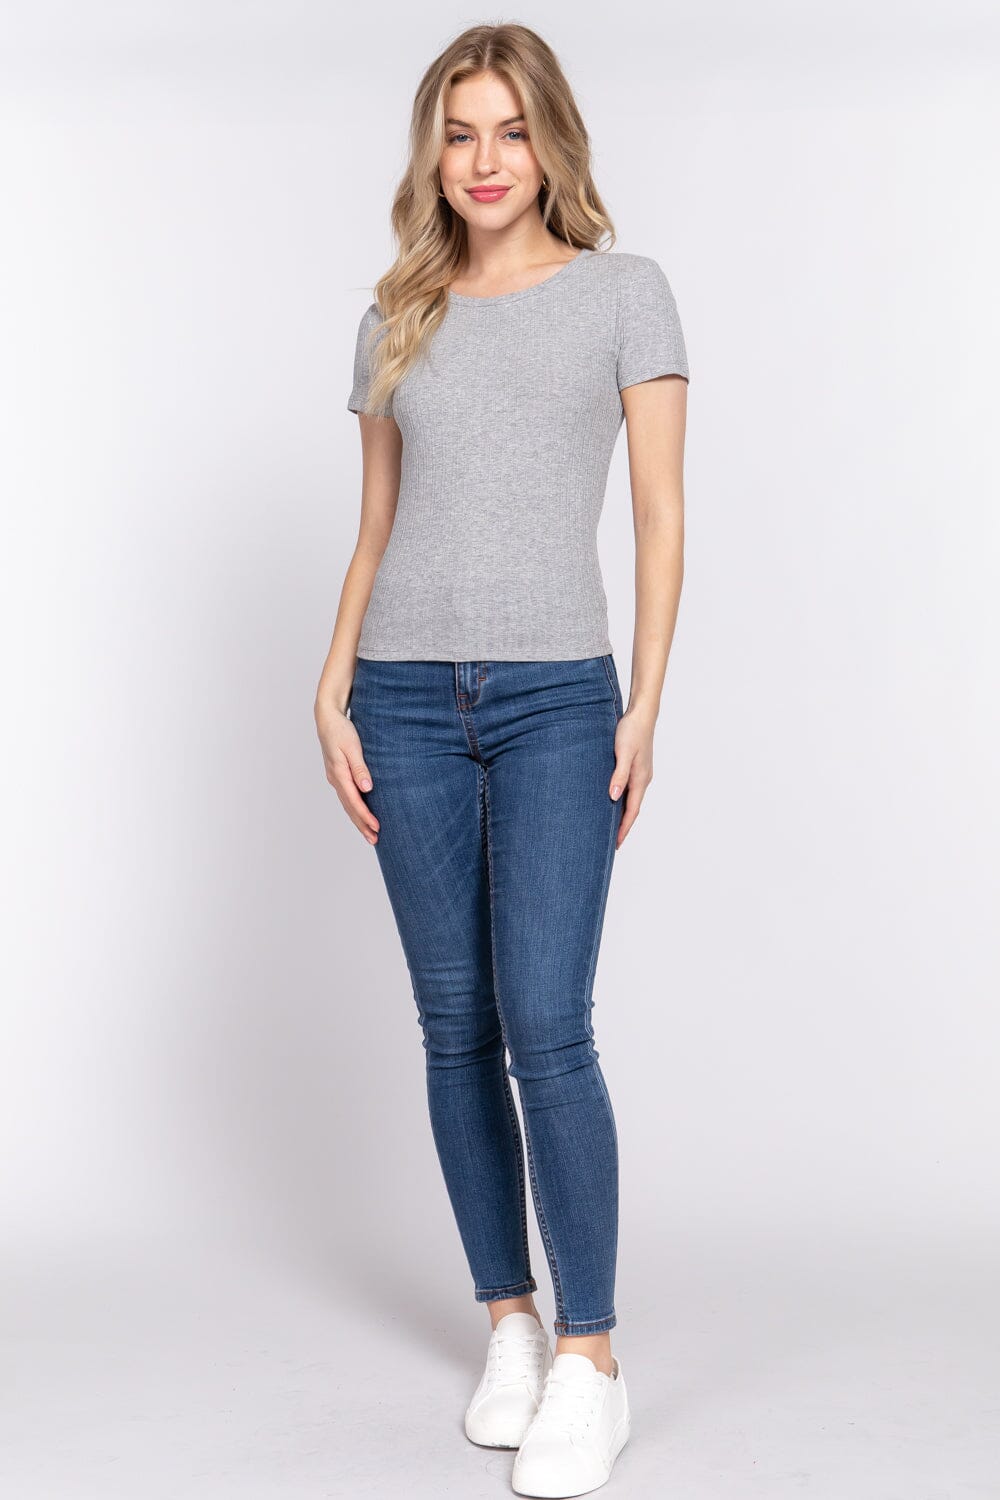 Heather Grey Basic Casual Short Sleeve Crew Neck Variegated Rib Knit Top Shirts & Tops jehouze S 